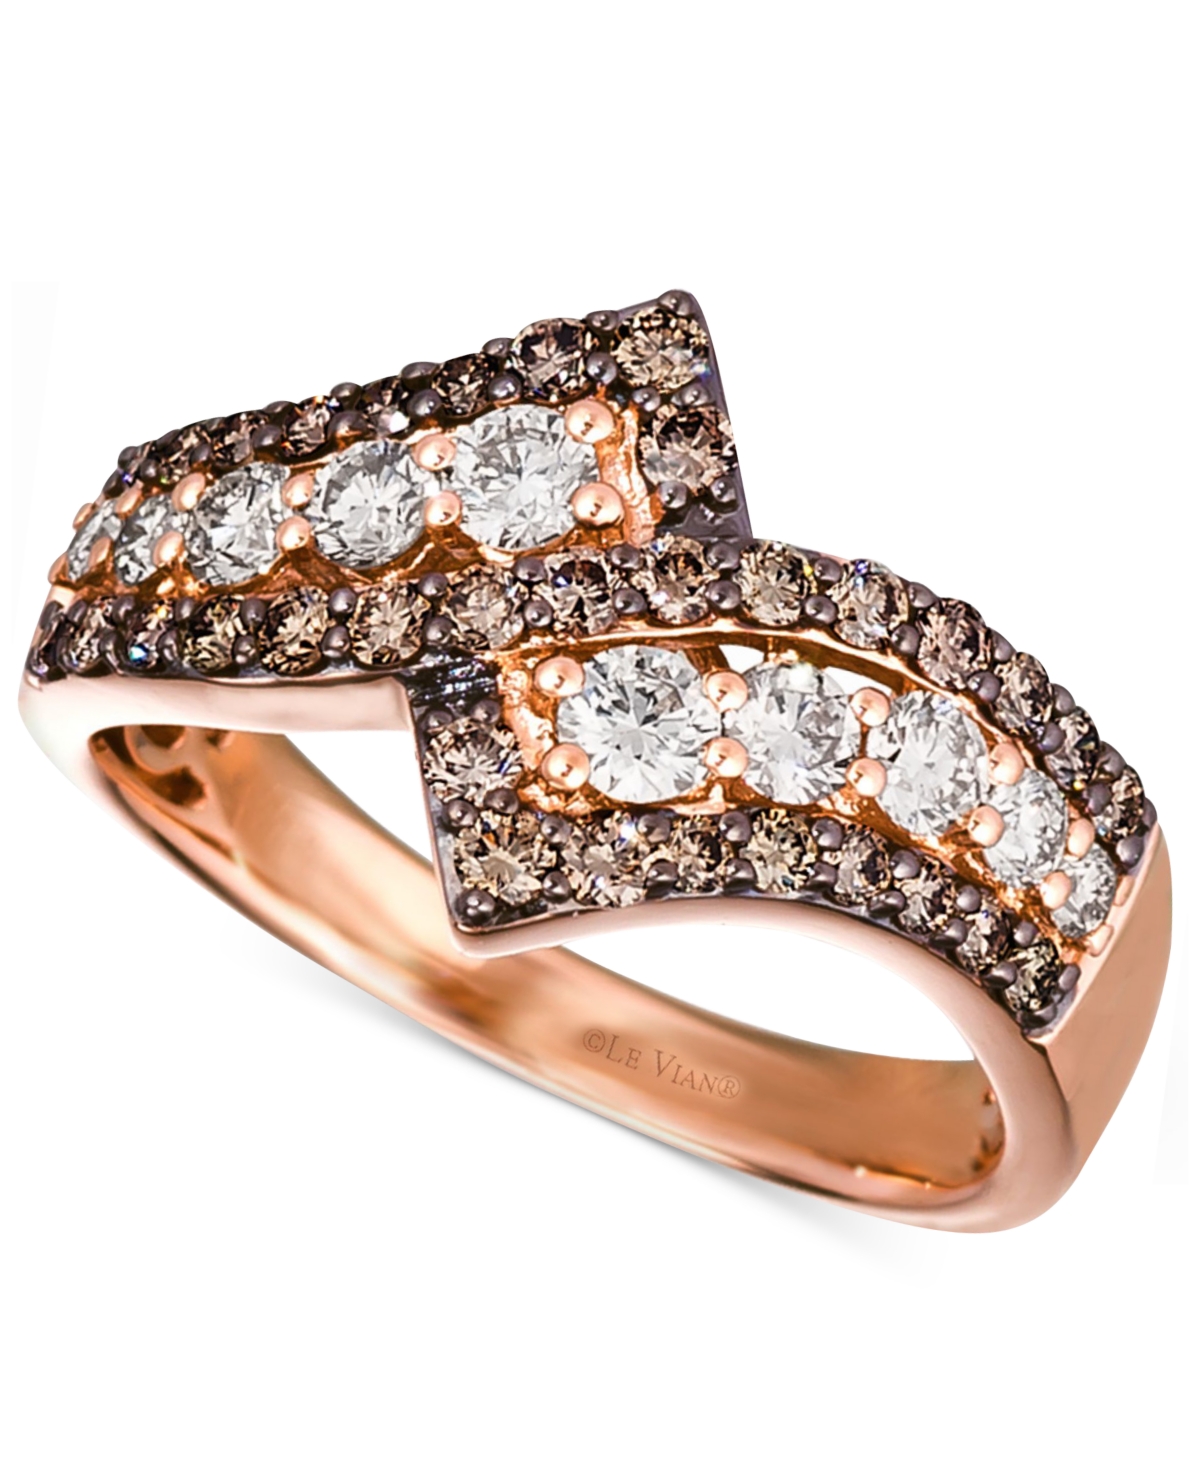 Le Vian Chocolate Diamond & Nude Diamond Bypass Ring (1 Ct. T.w.) In 14k Rose Gold In K Strawberry Gold Ring